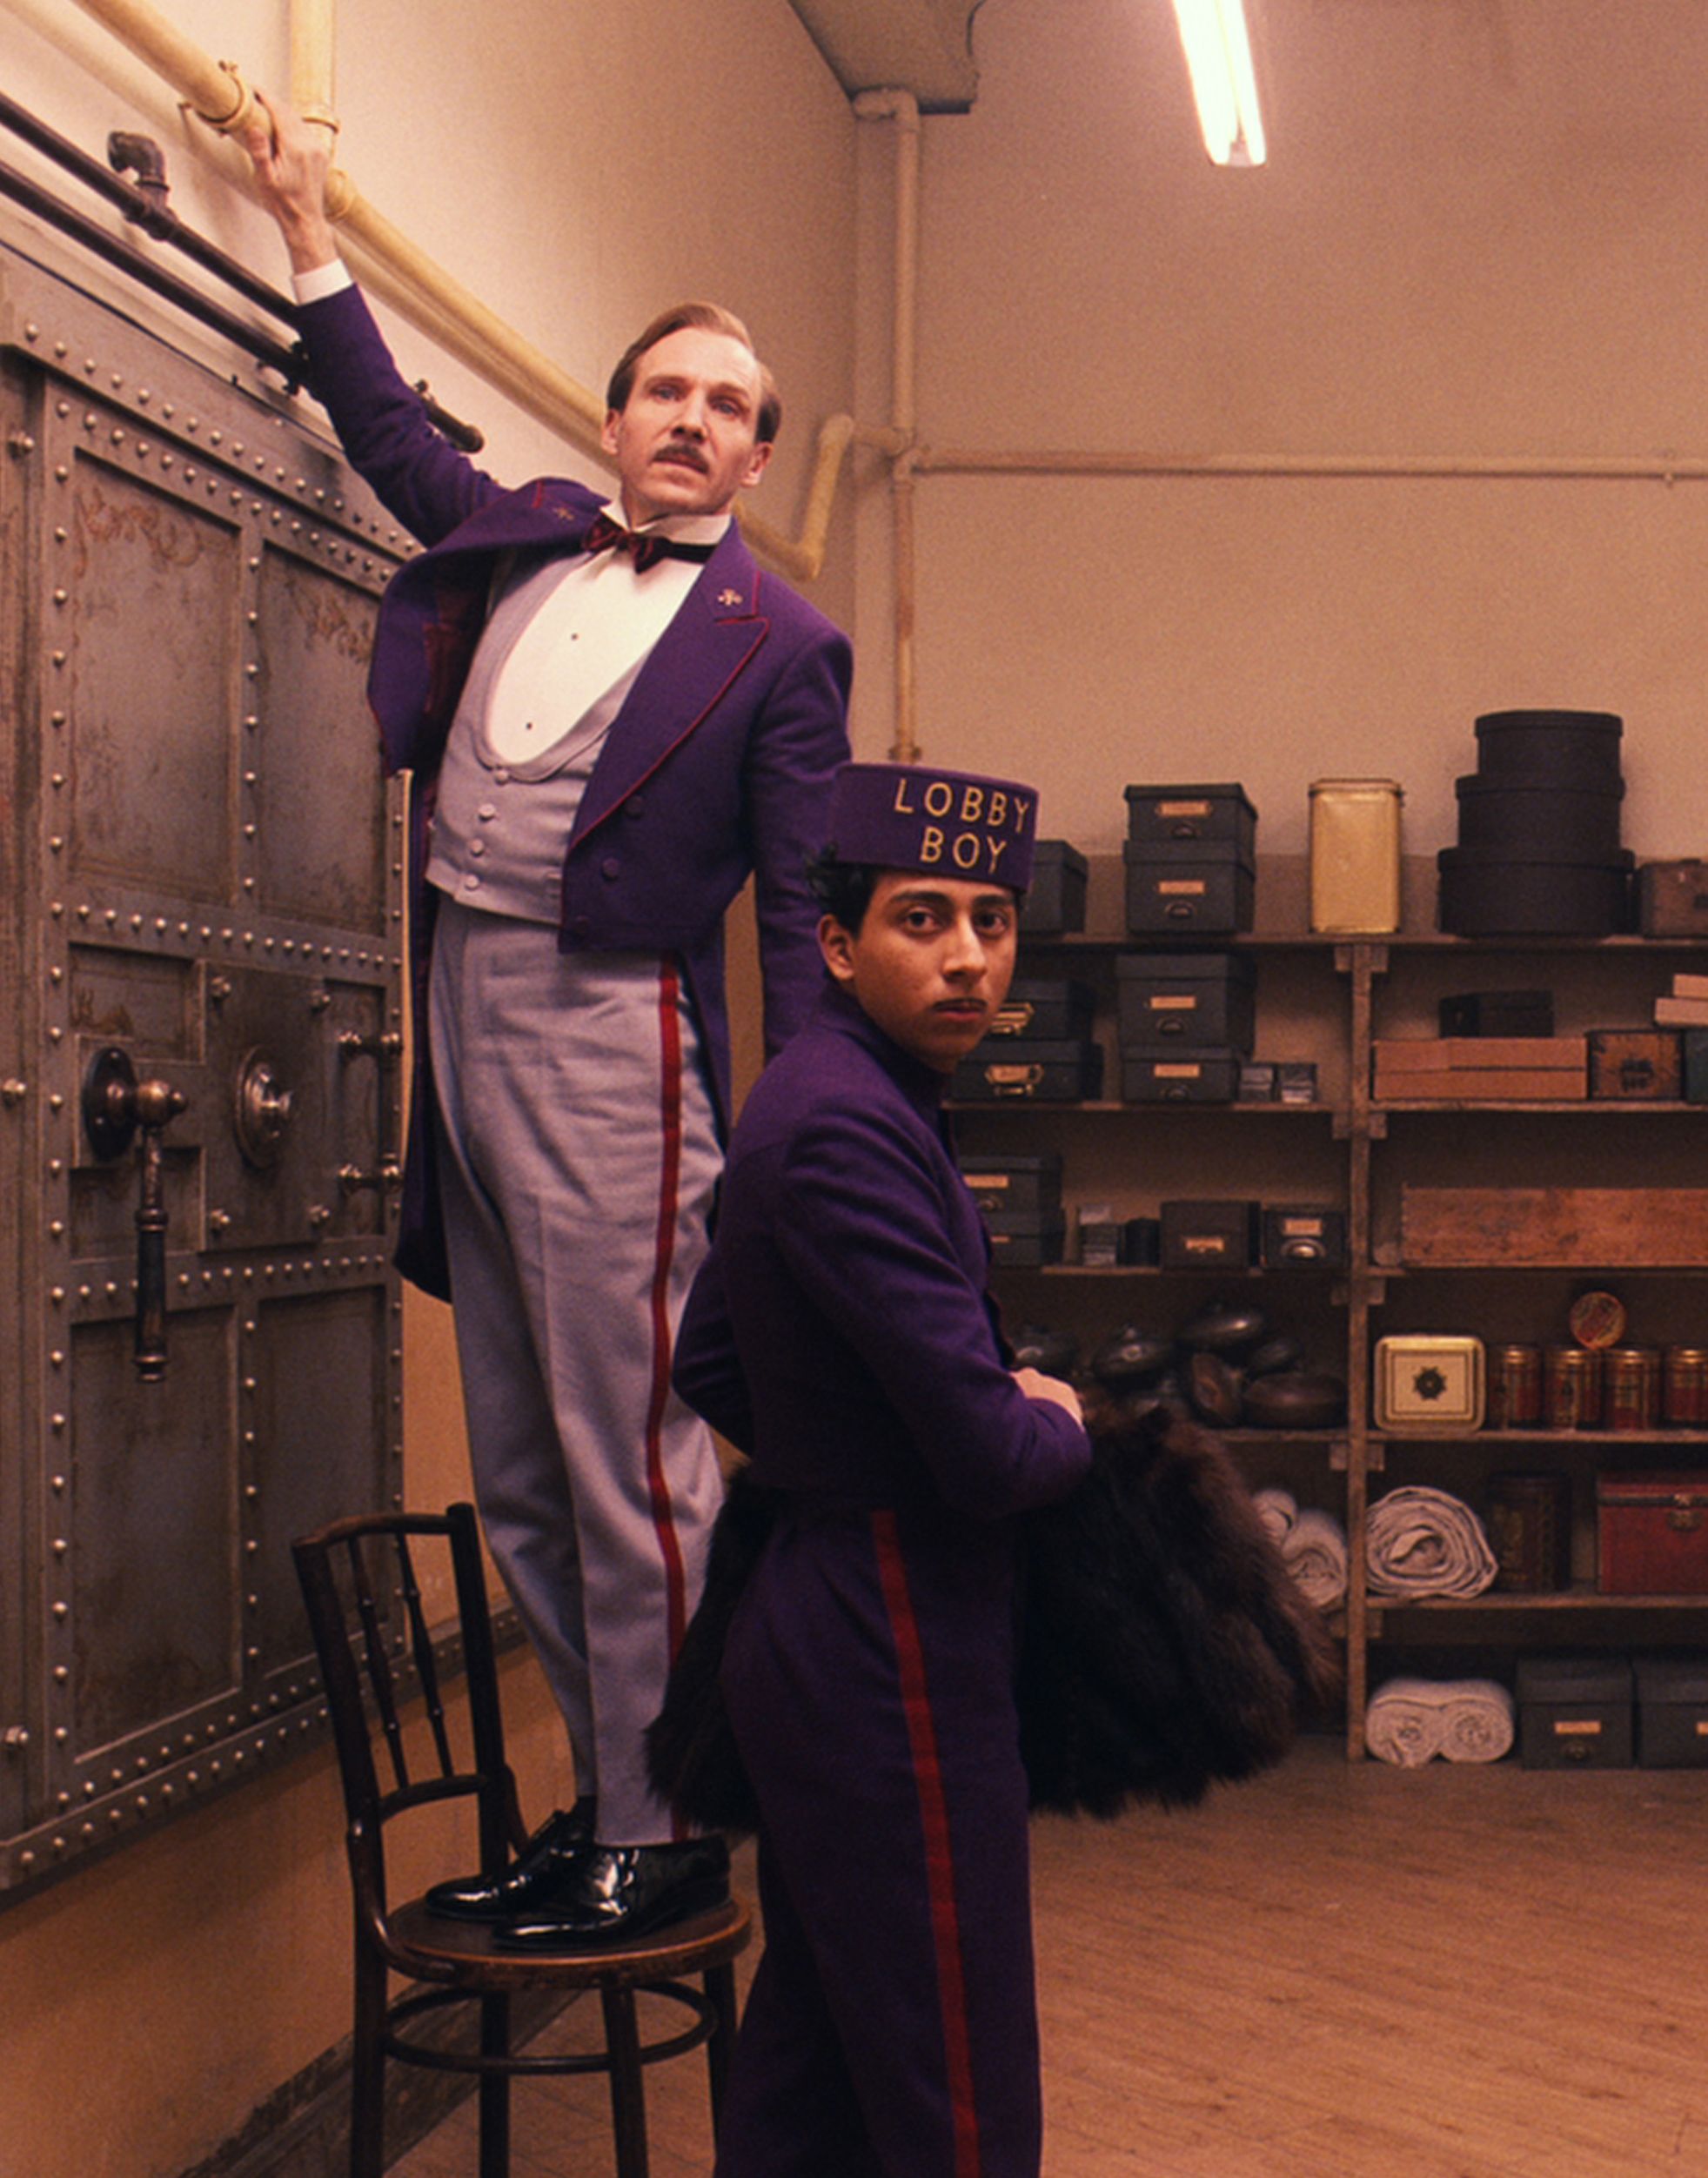 Gustave and lobby boy caught - The Grand Budapest Hotel